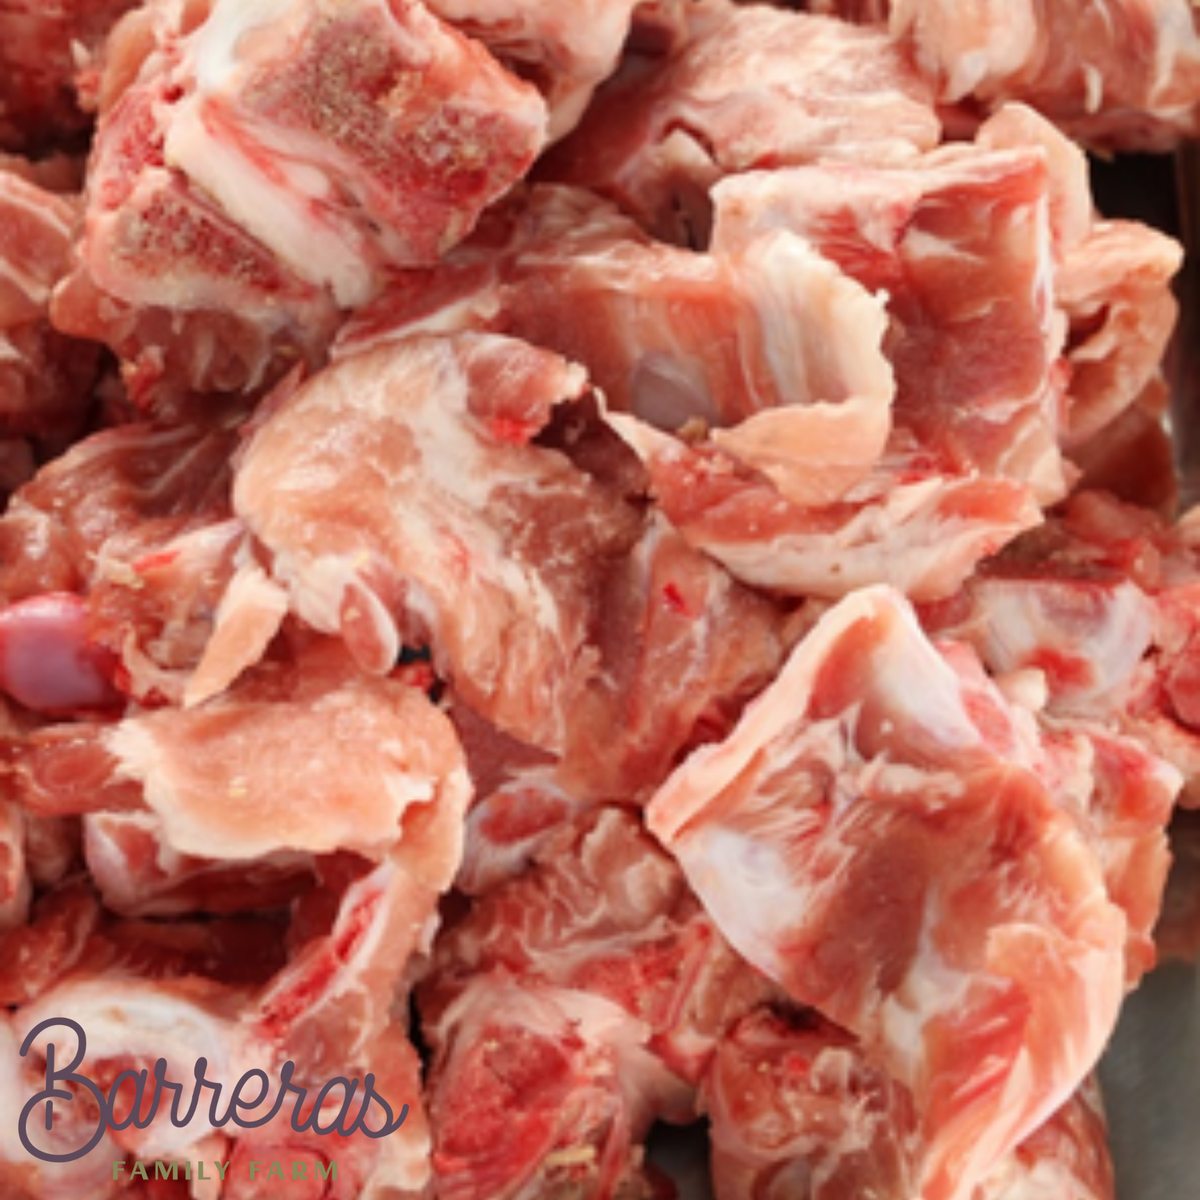 raw beef bones, grassfed and alfalfa finished beef. your dogs will thank you!